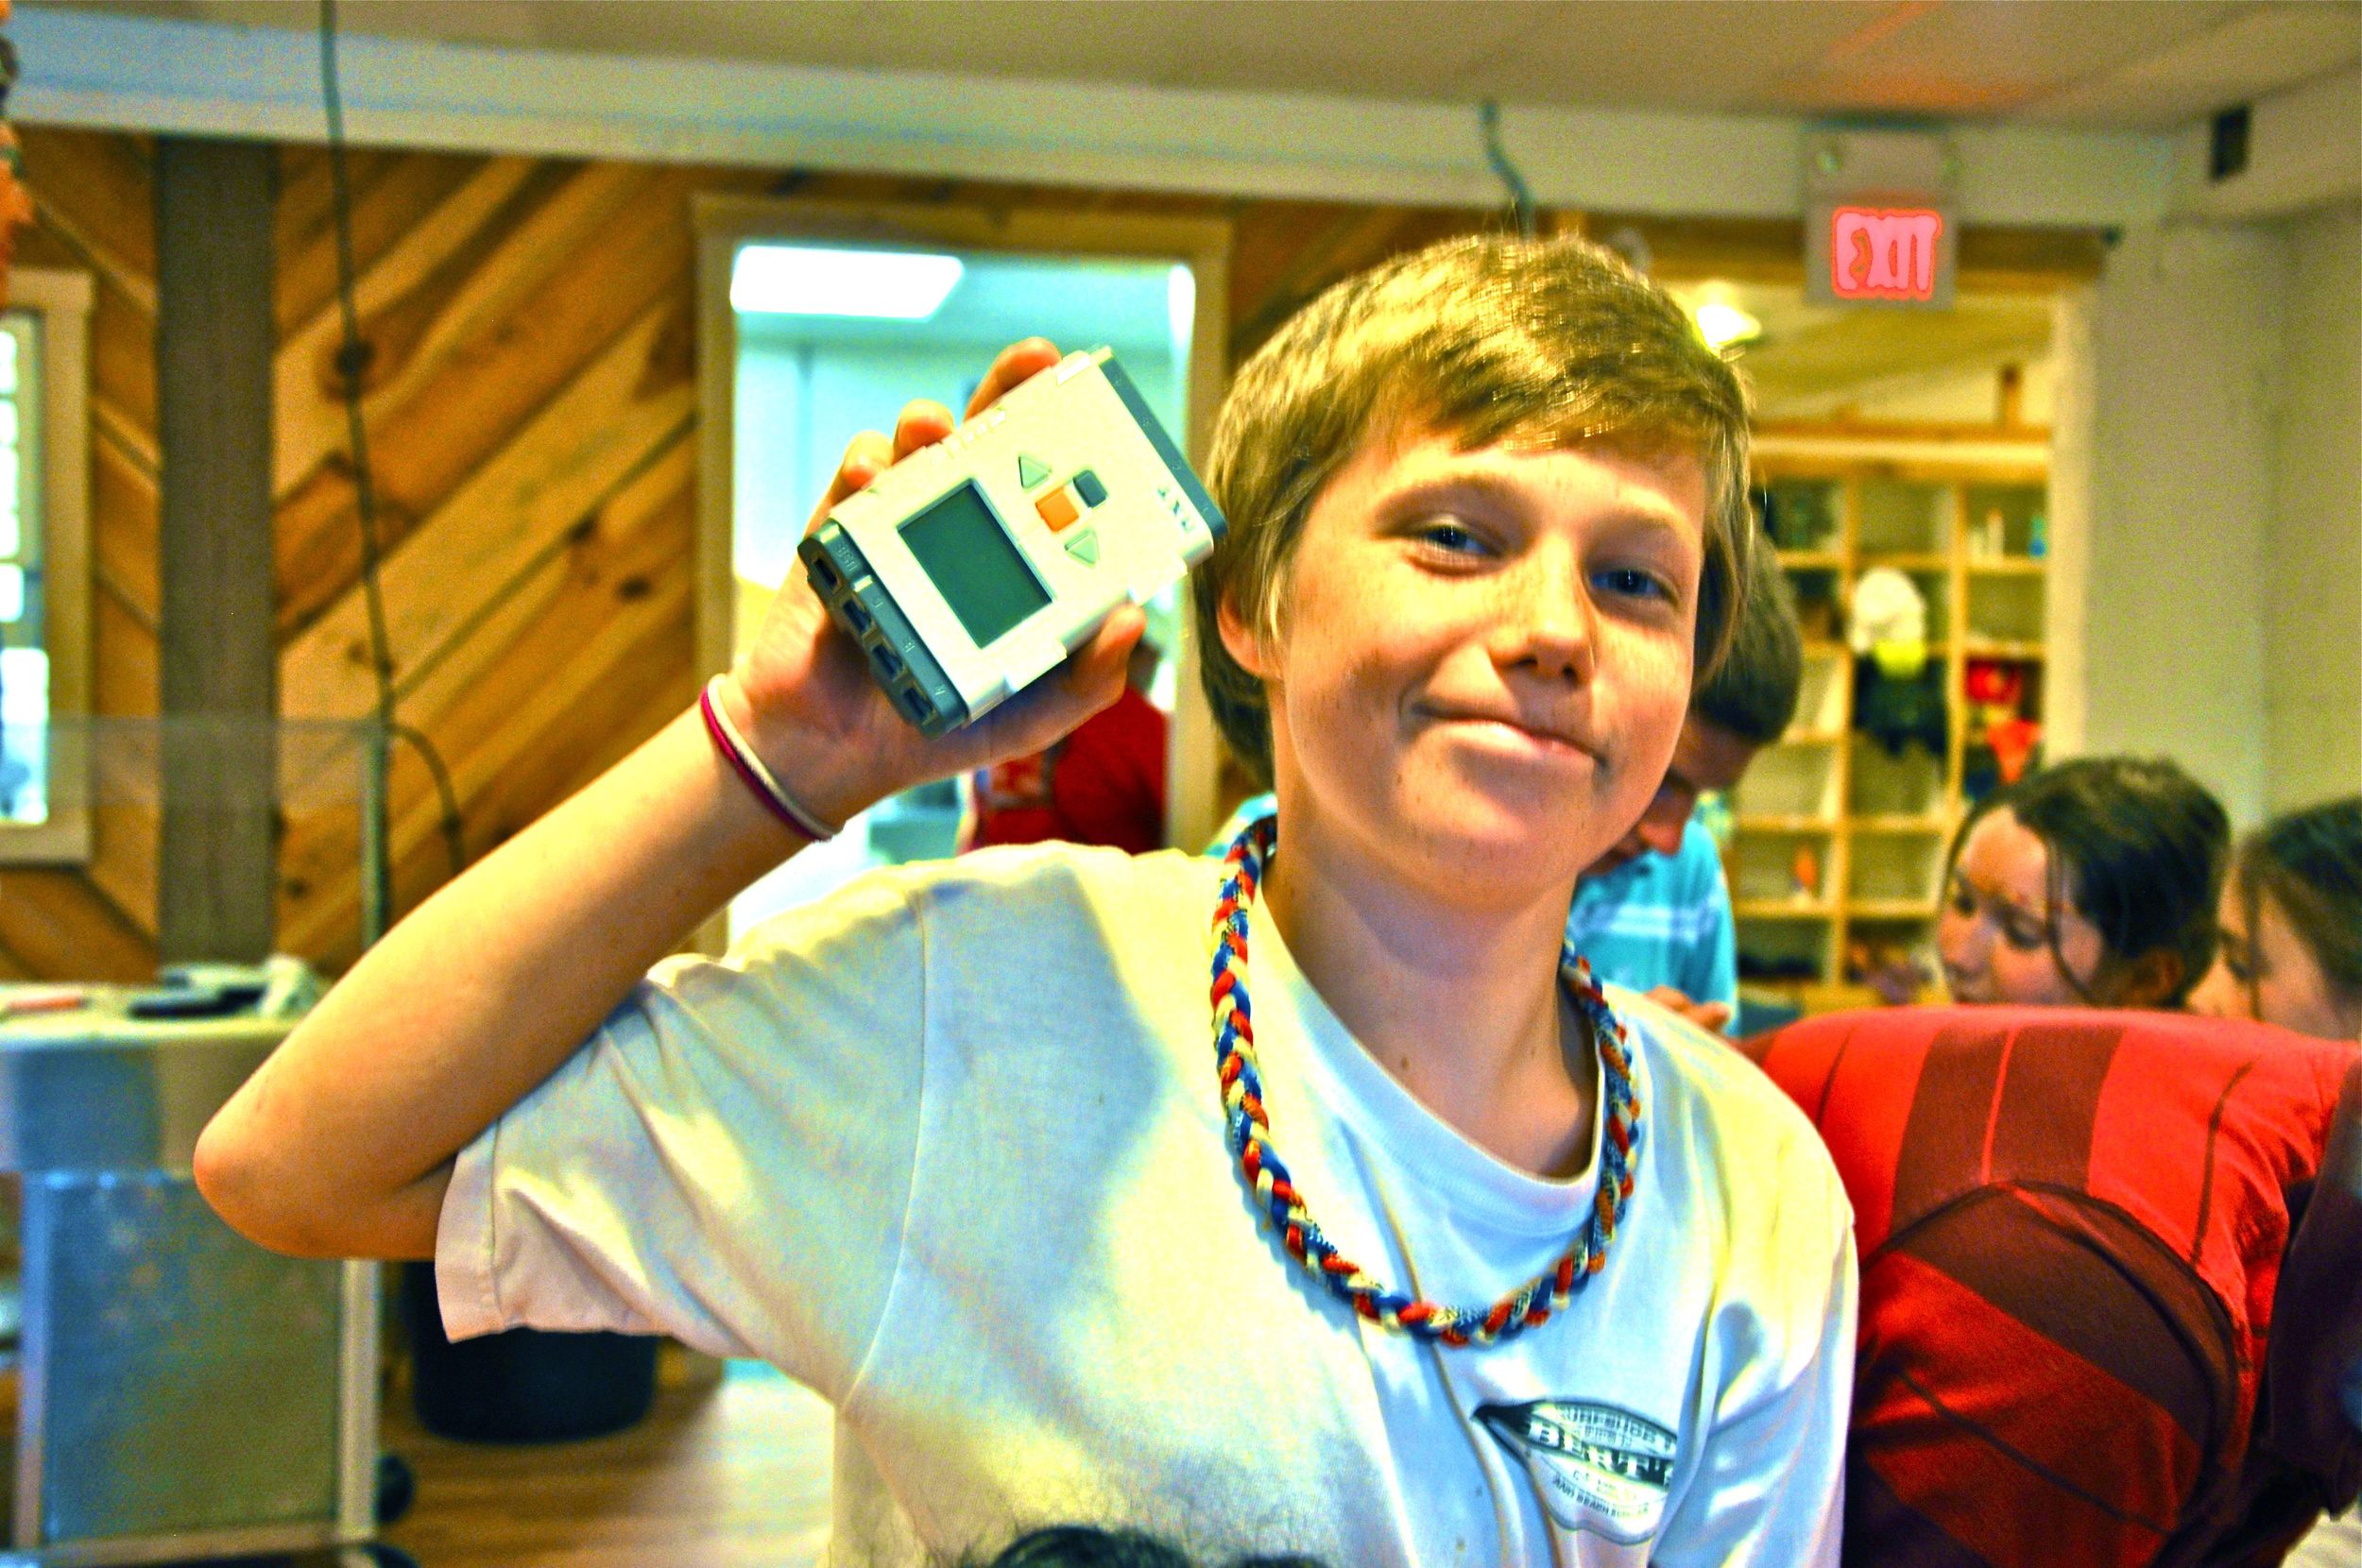 tyler-was-one-of-the-campers-who-was-really-excited-about-robotics-and-couldnt-wait-to-learn-more.jpg